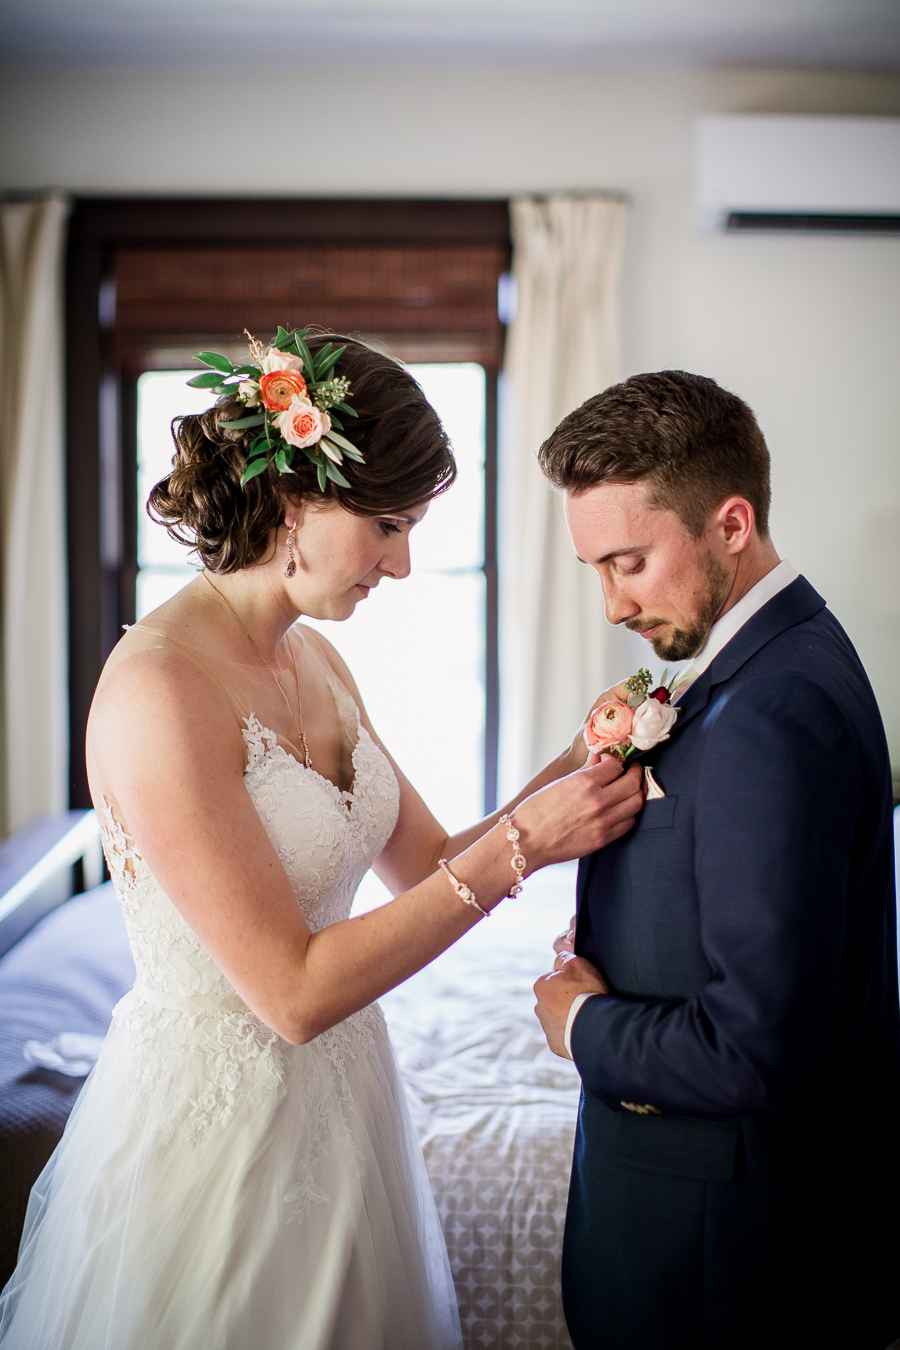 Bride helping Groom with flower at this North Carolina Elopement by Knoxville Wedding Photographer, Amanda May Photos.